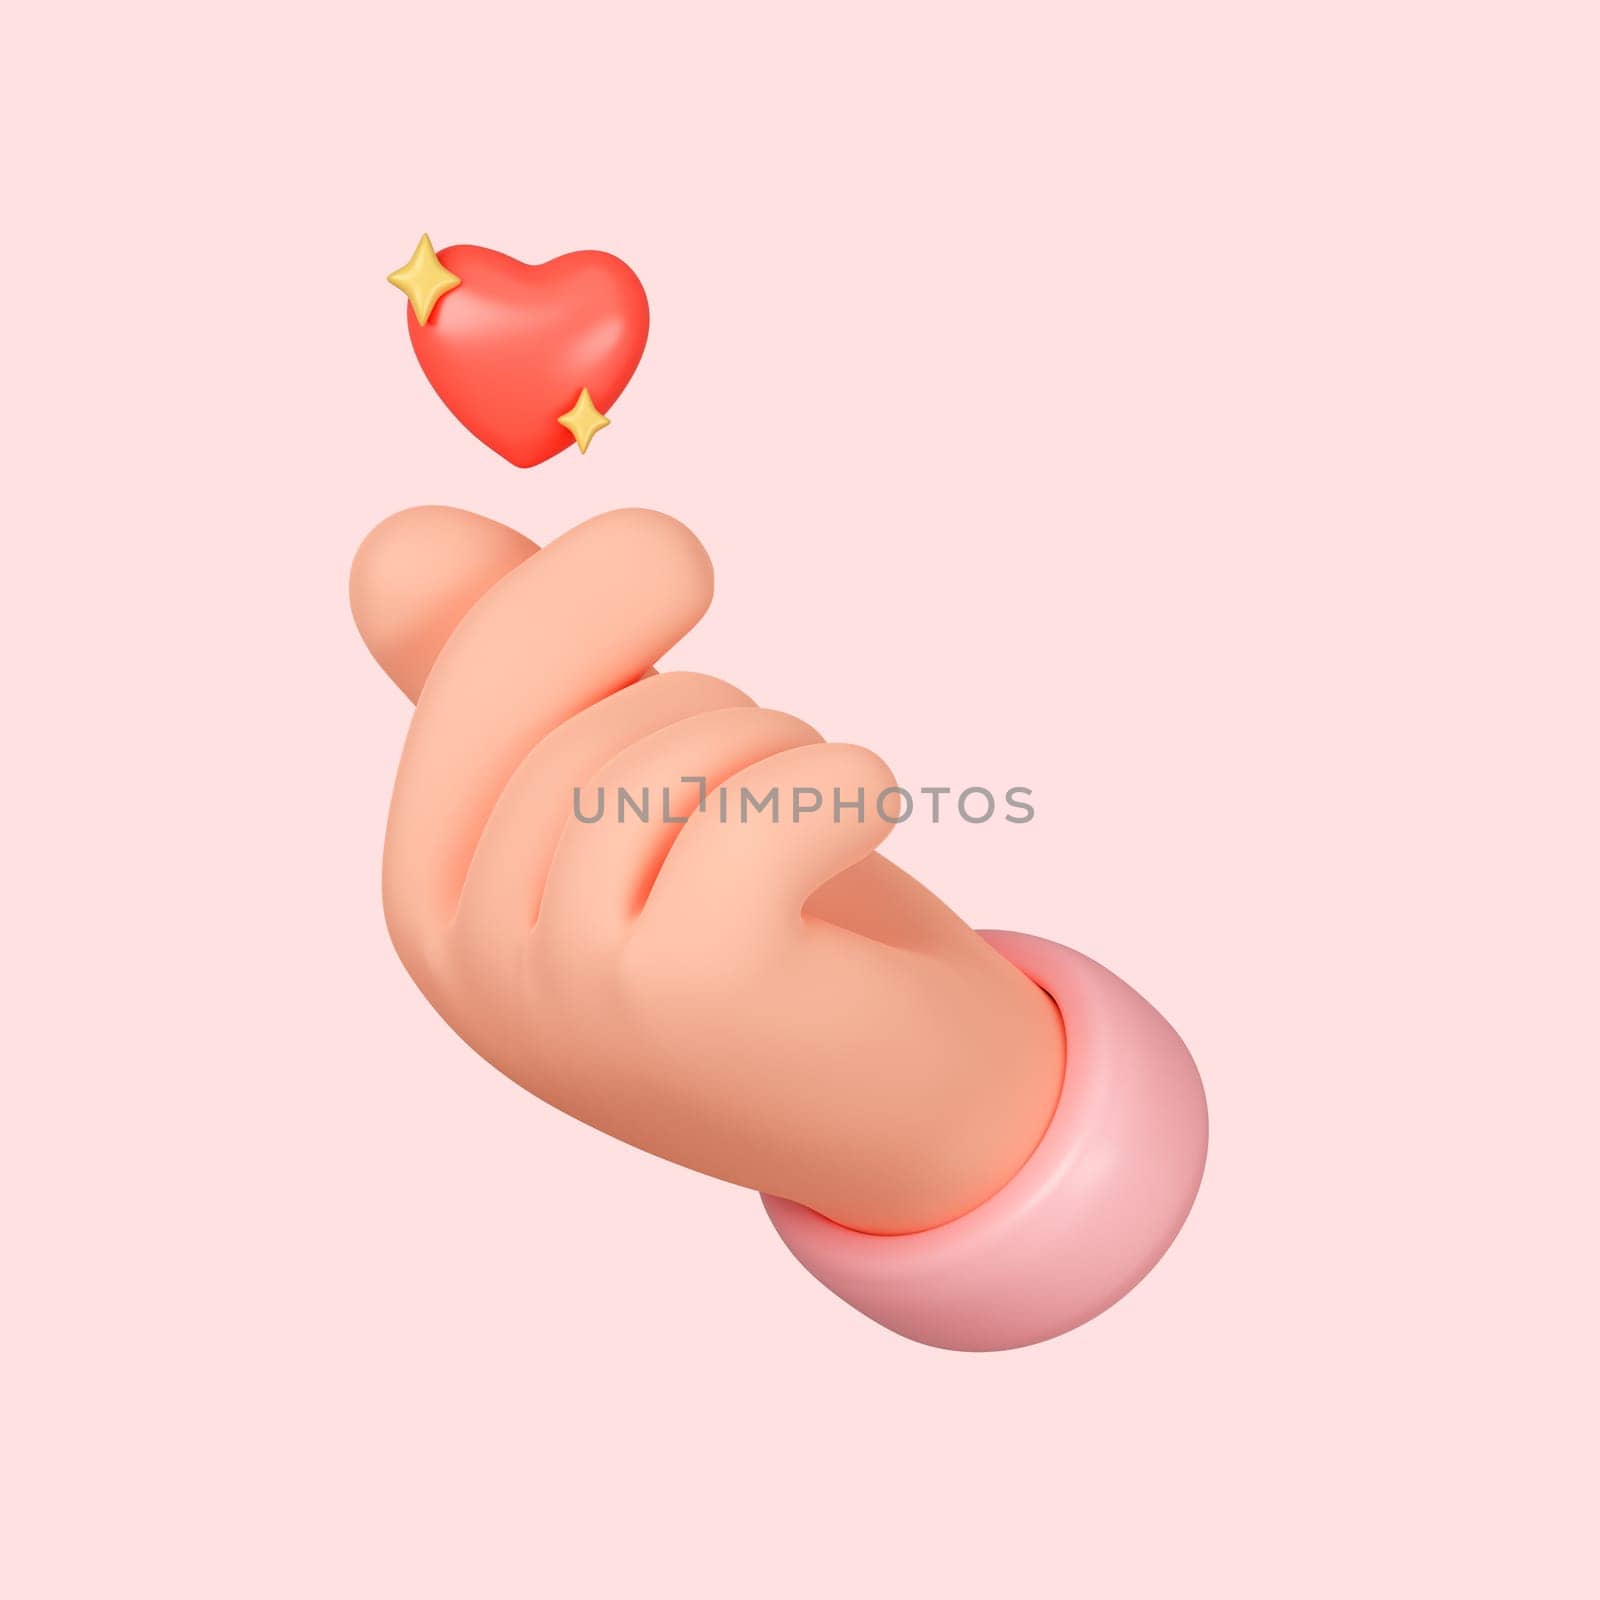 3d hands mini love gesture with red heart, korean kpop expression of love isolated on pink background with clipping path. c by meepiangraphic